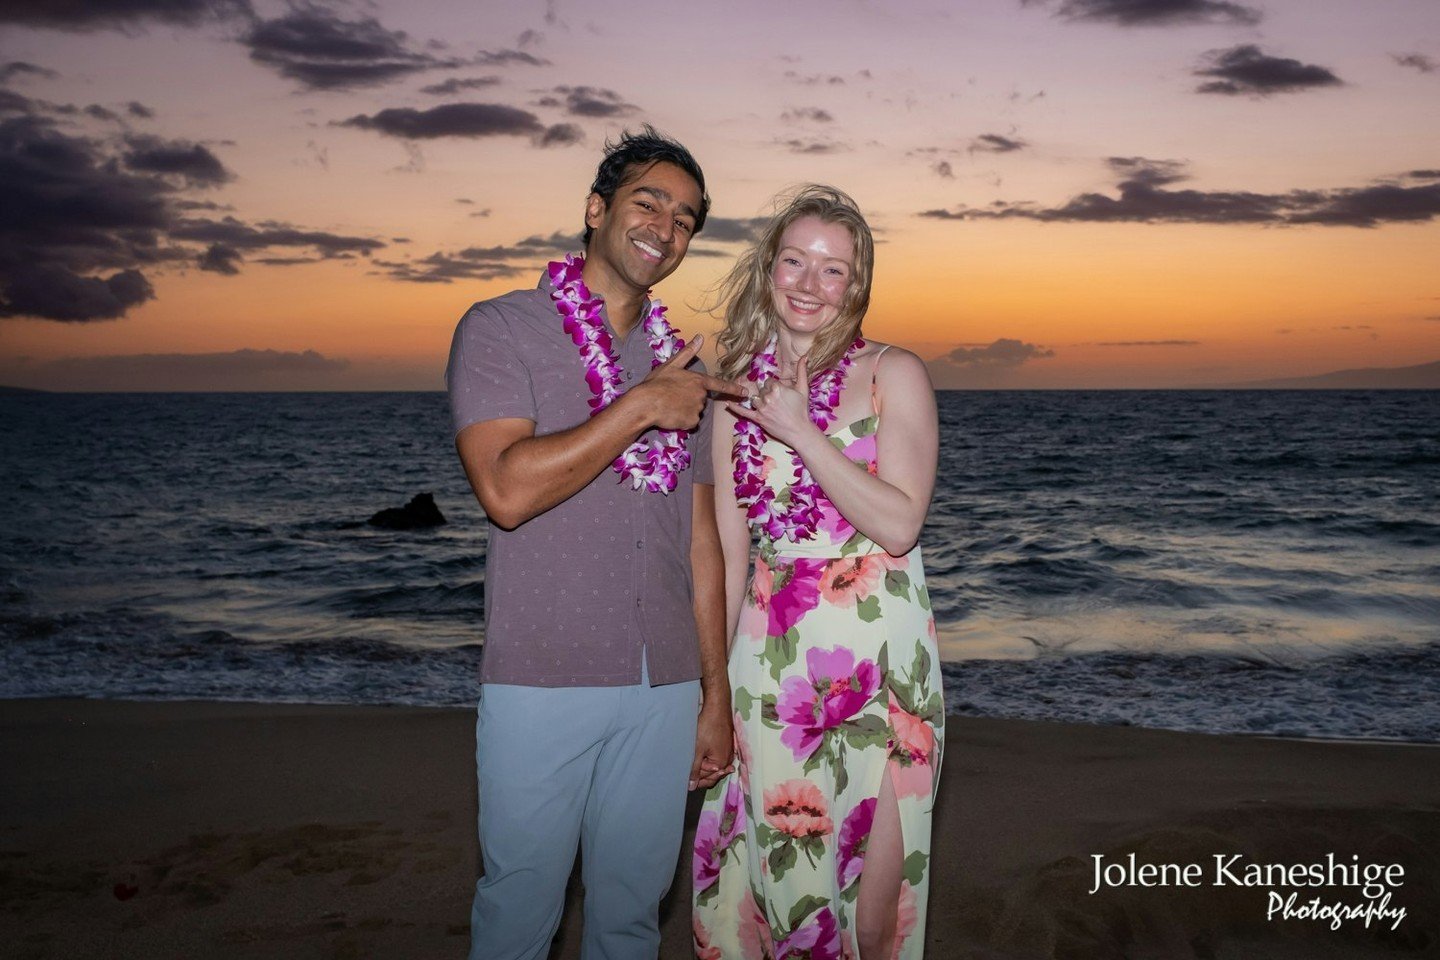 What better way to start the weekend than with a touch of aloha and a sprinkle of magic? 🌺 under the vibrant Hawaiian skies, love took center stage as he took her hand and whispered those four timeless words: &quot;Will you marry me?&quot; 💑

#SheS